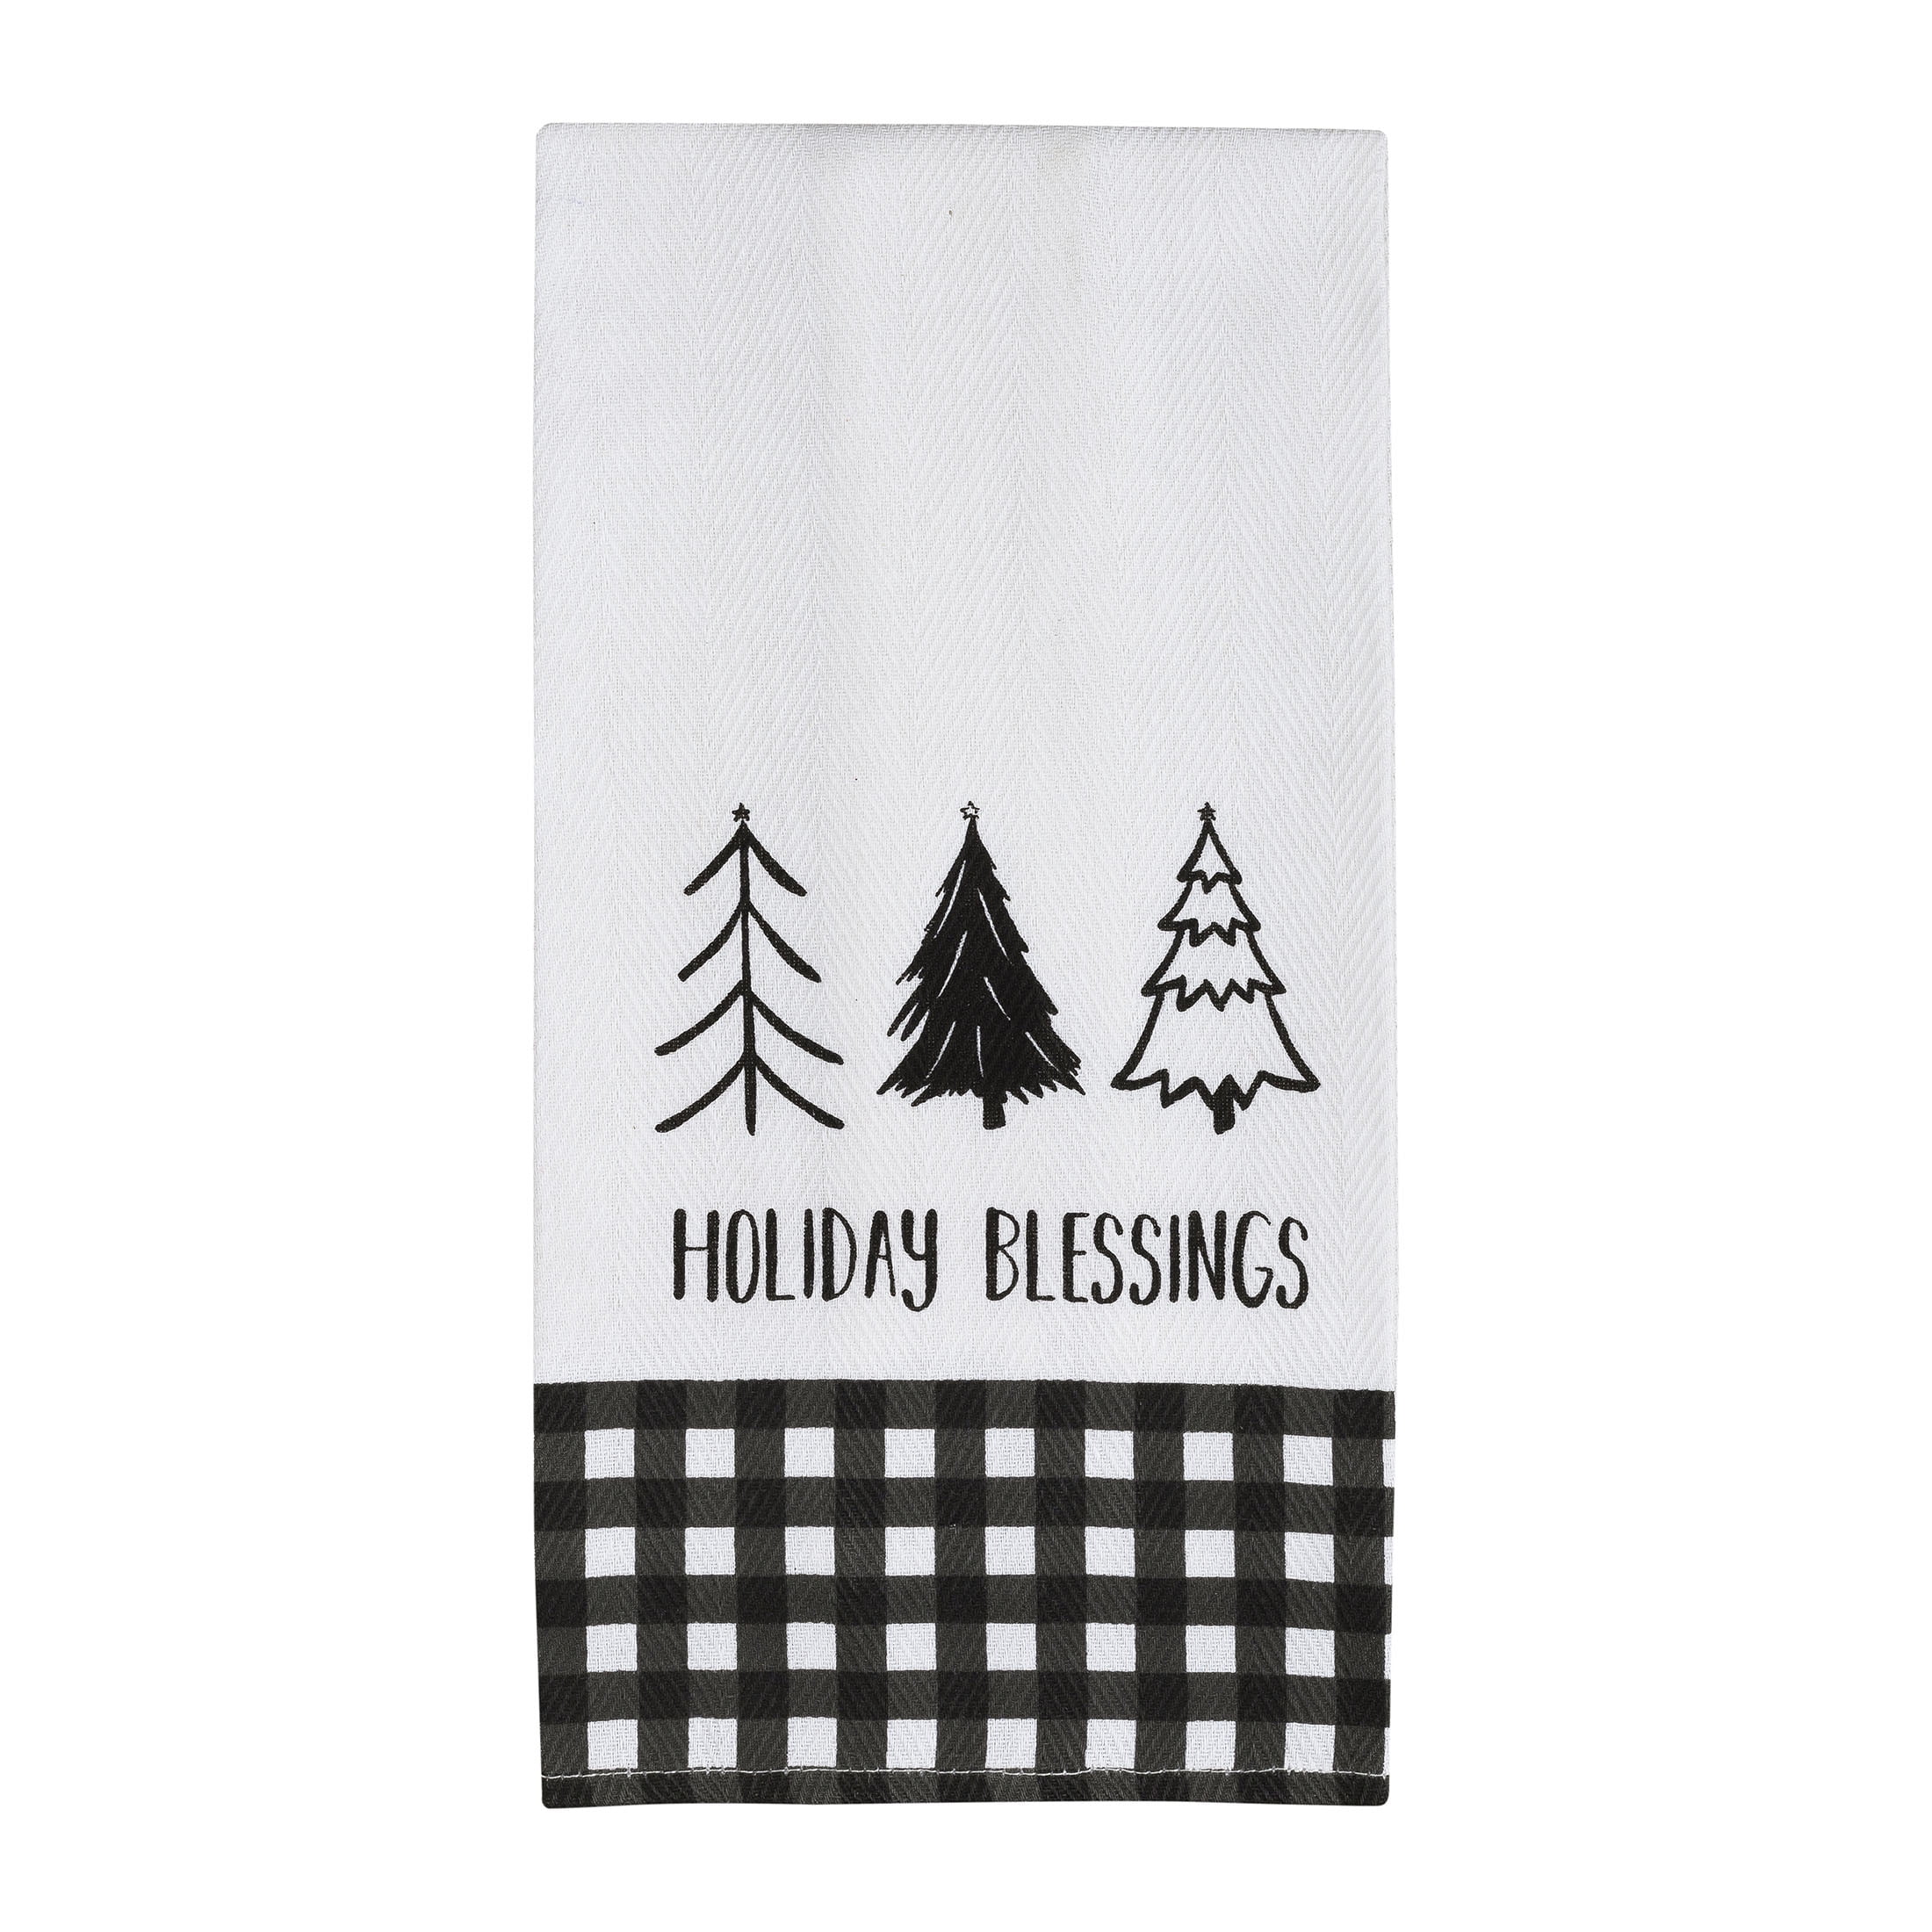 These 'Very Absorbent' Kitchen Towels Are Just Over $2 Apiece Ahead of the  Holidays